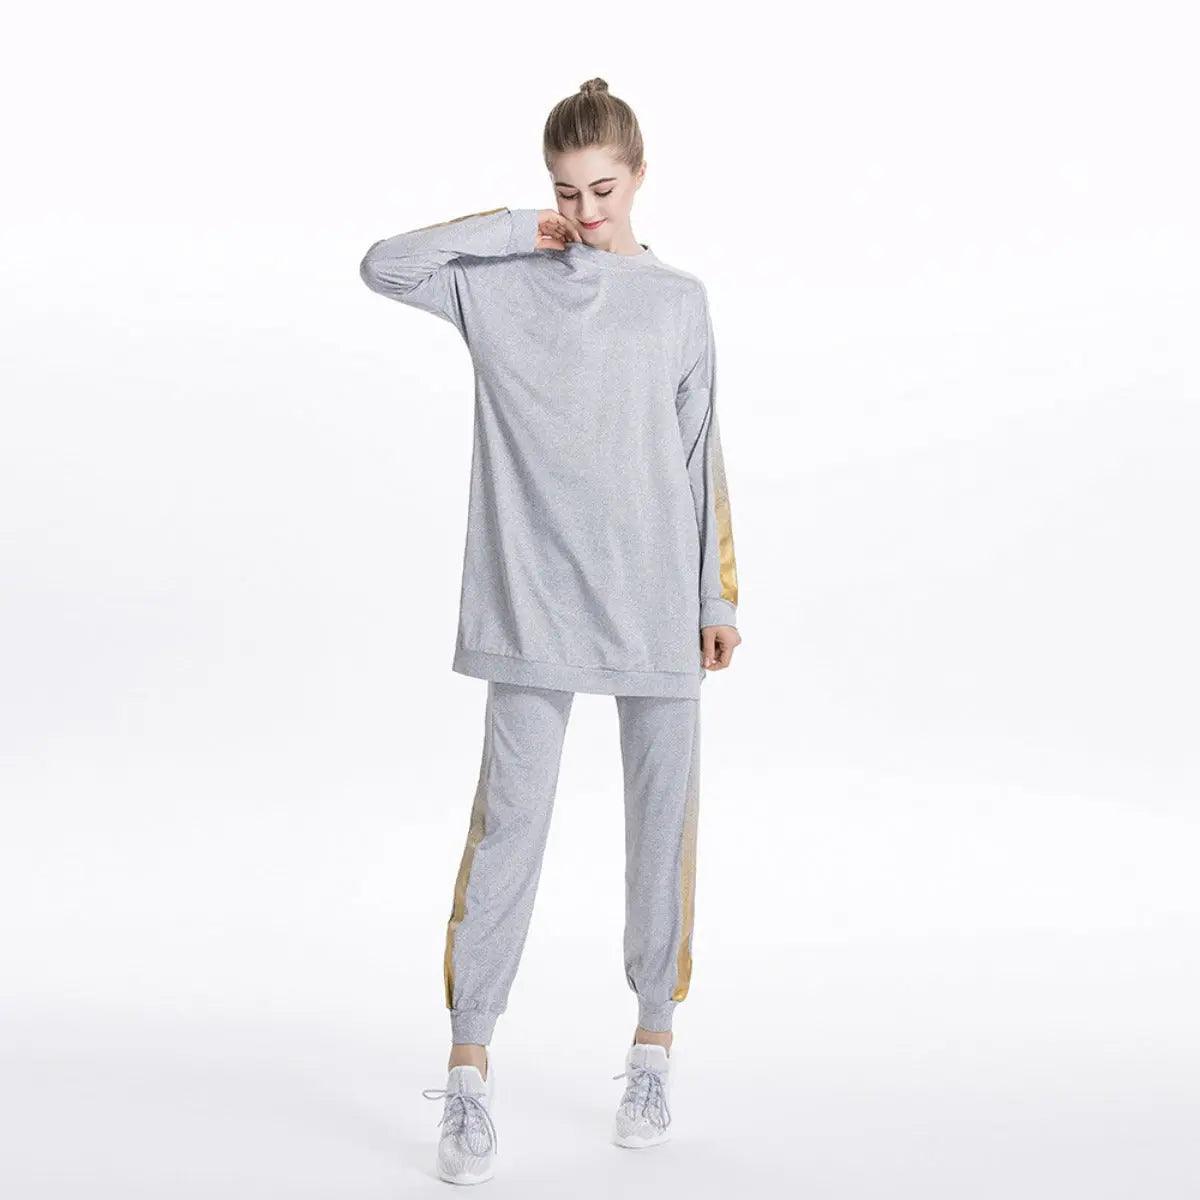 Women's Casual Two Piece Sweatsuit Set - Long Sleeve Crewneck and Joggers MB008 - Mariam's Collection